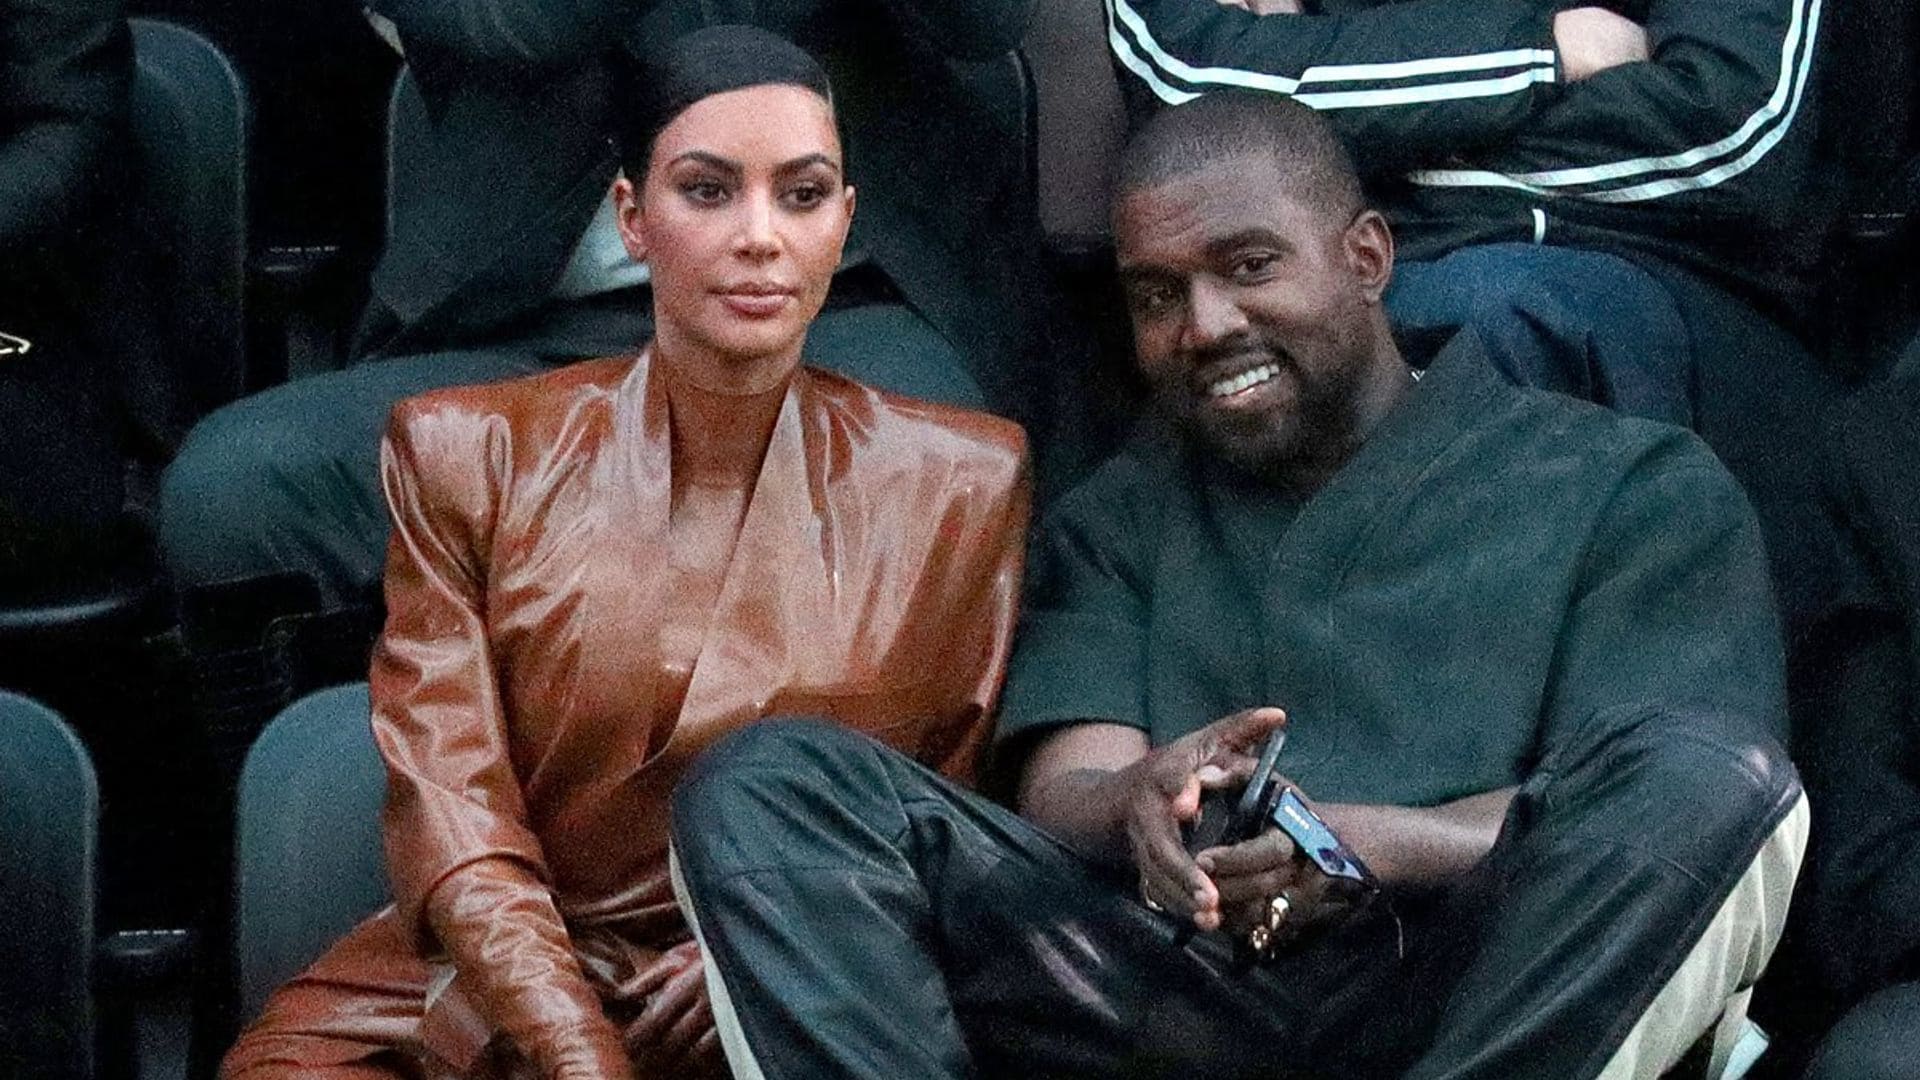 Kim Kardashian is not backing up! The star wants to divorce Kanye West